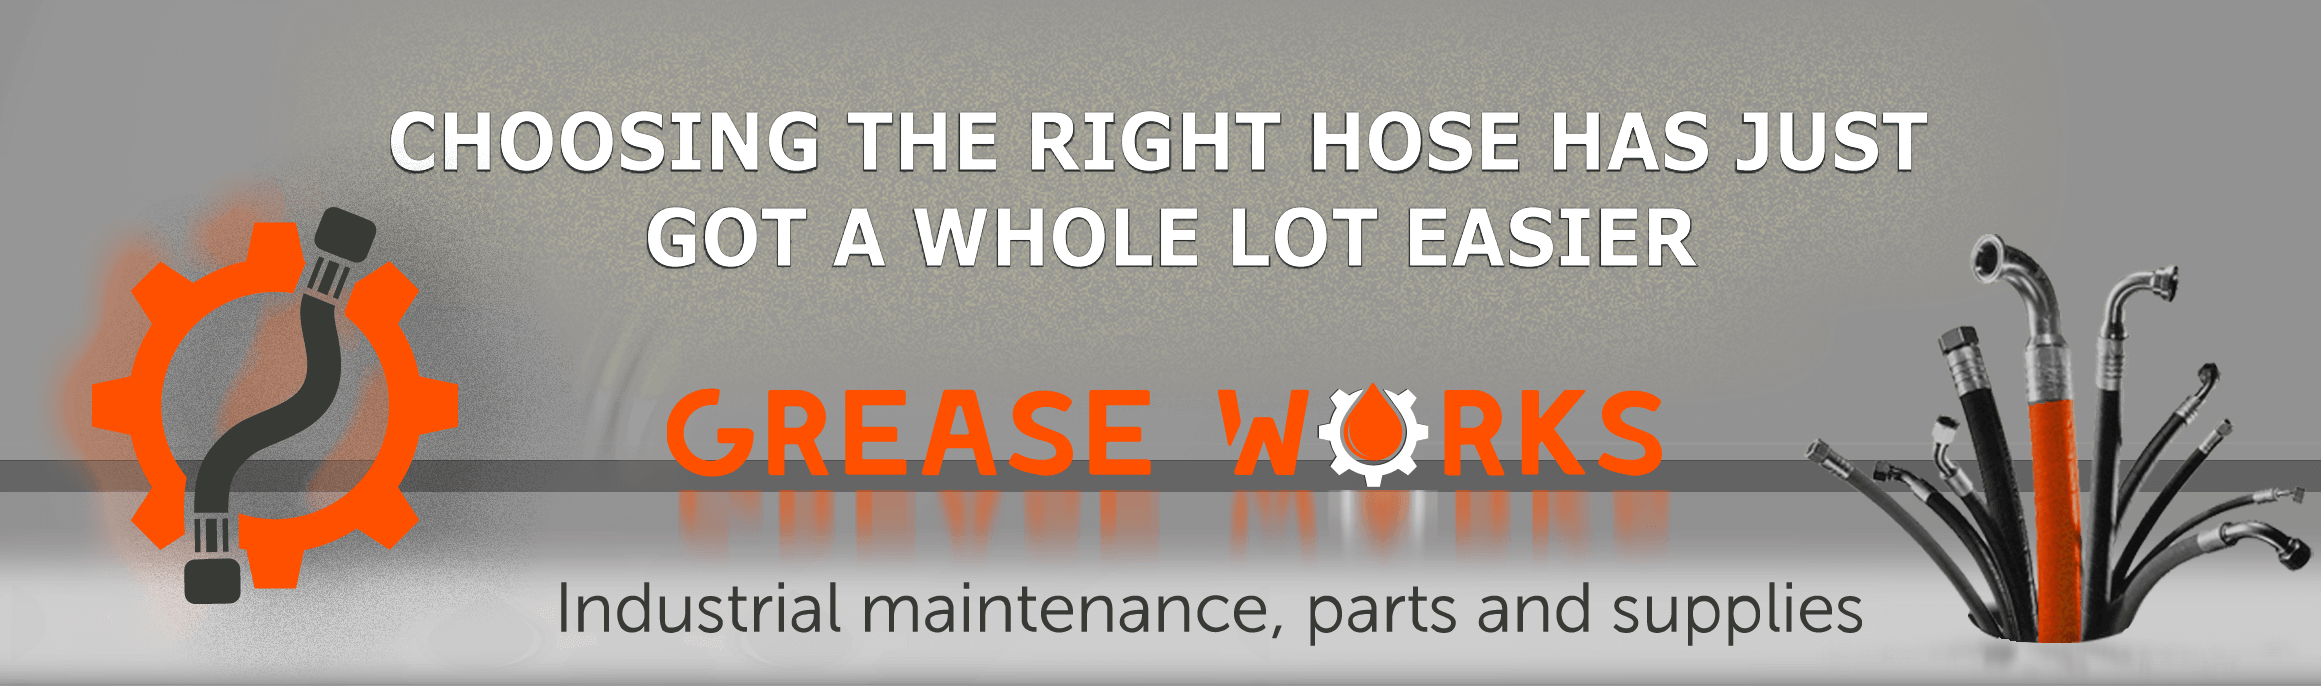 About Greaseworks